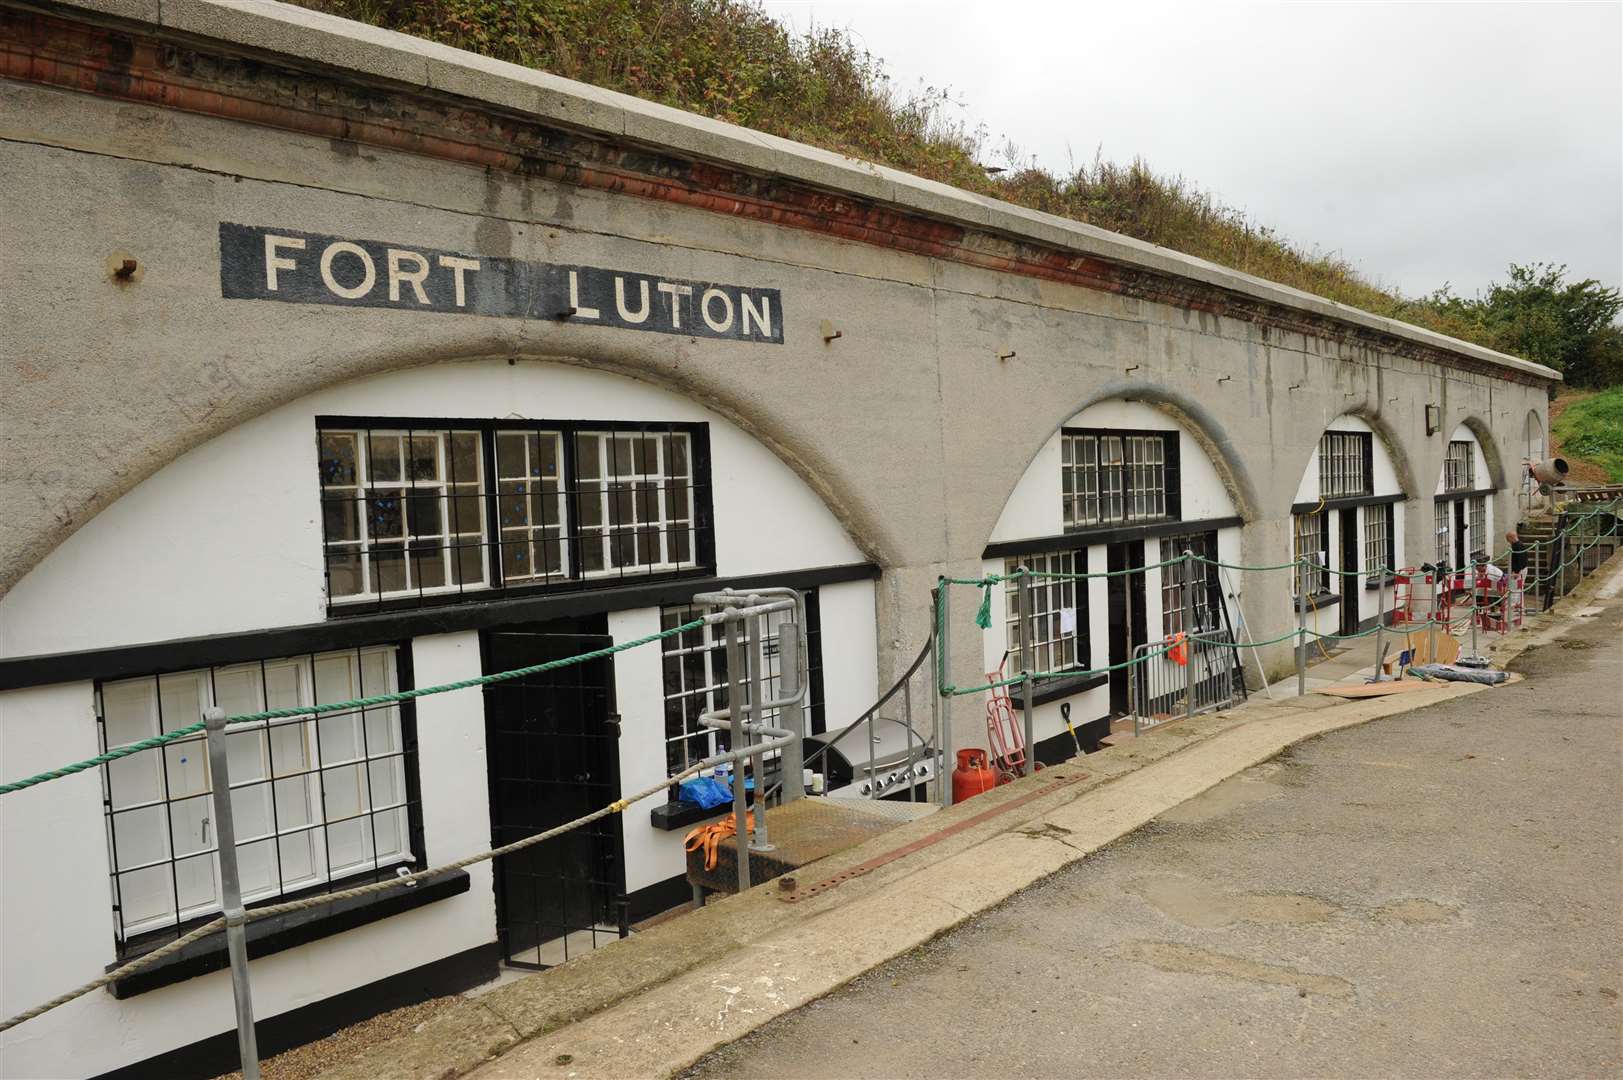 The 19th century fort